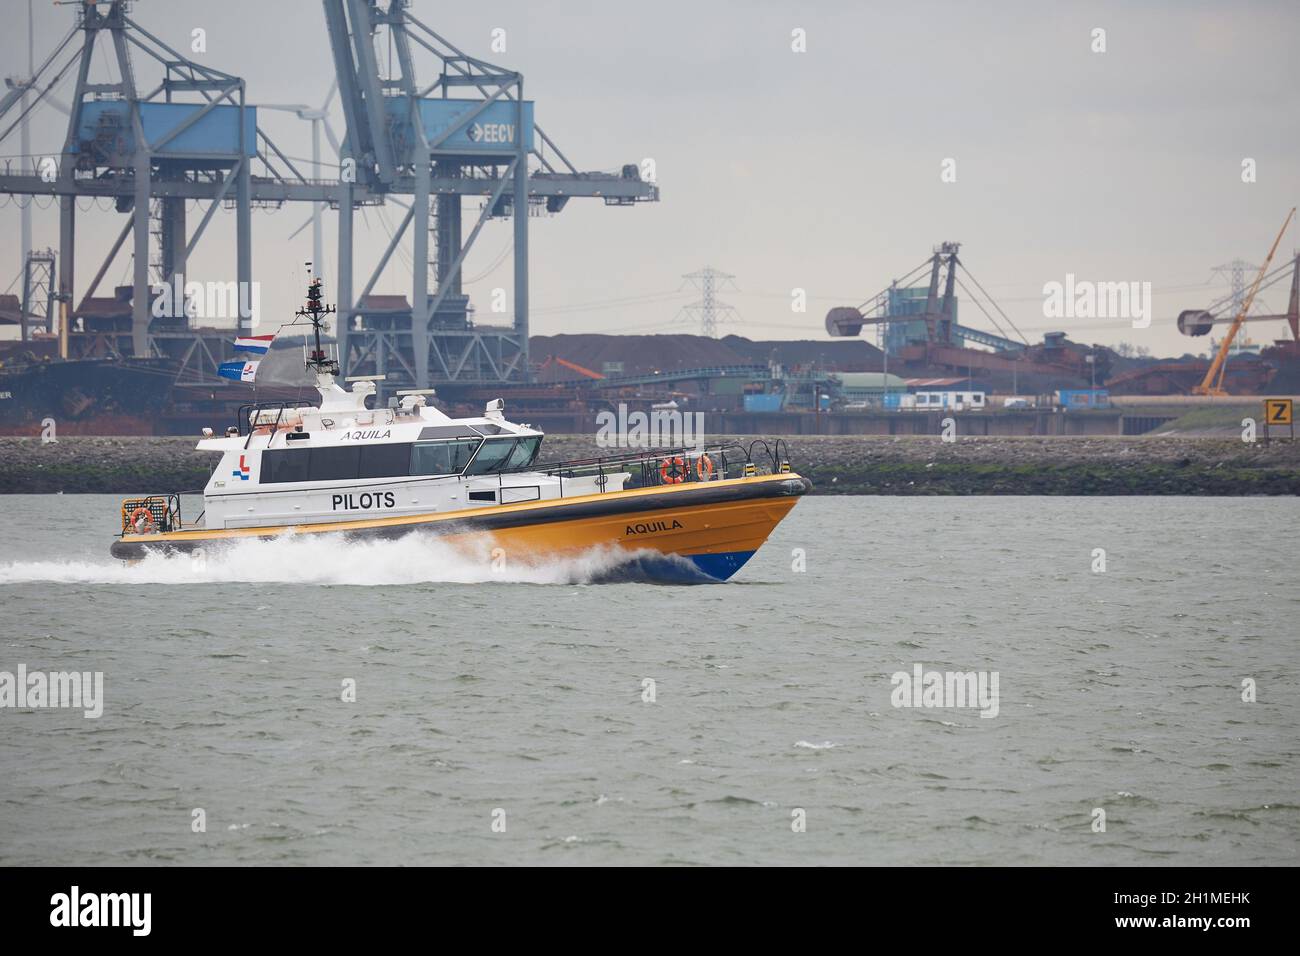 PORT OF ROTTERDAM, THE NETHERLANDS - CIRCA 2017: Pilot boat on the way to help a ship come into port. Stock Photo